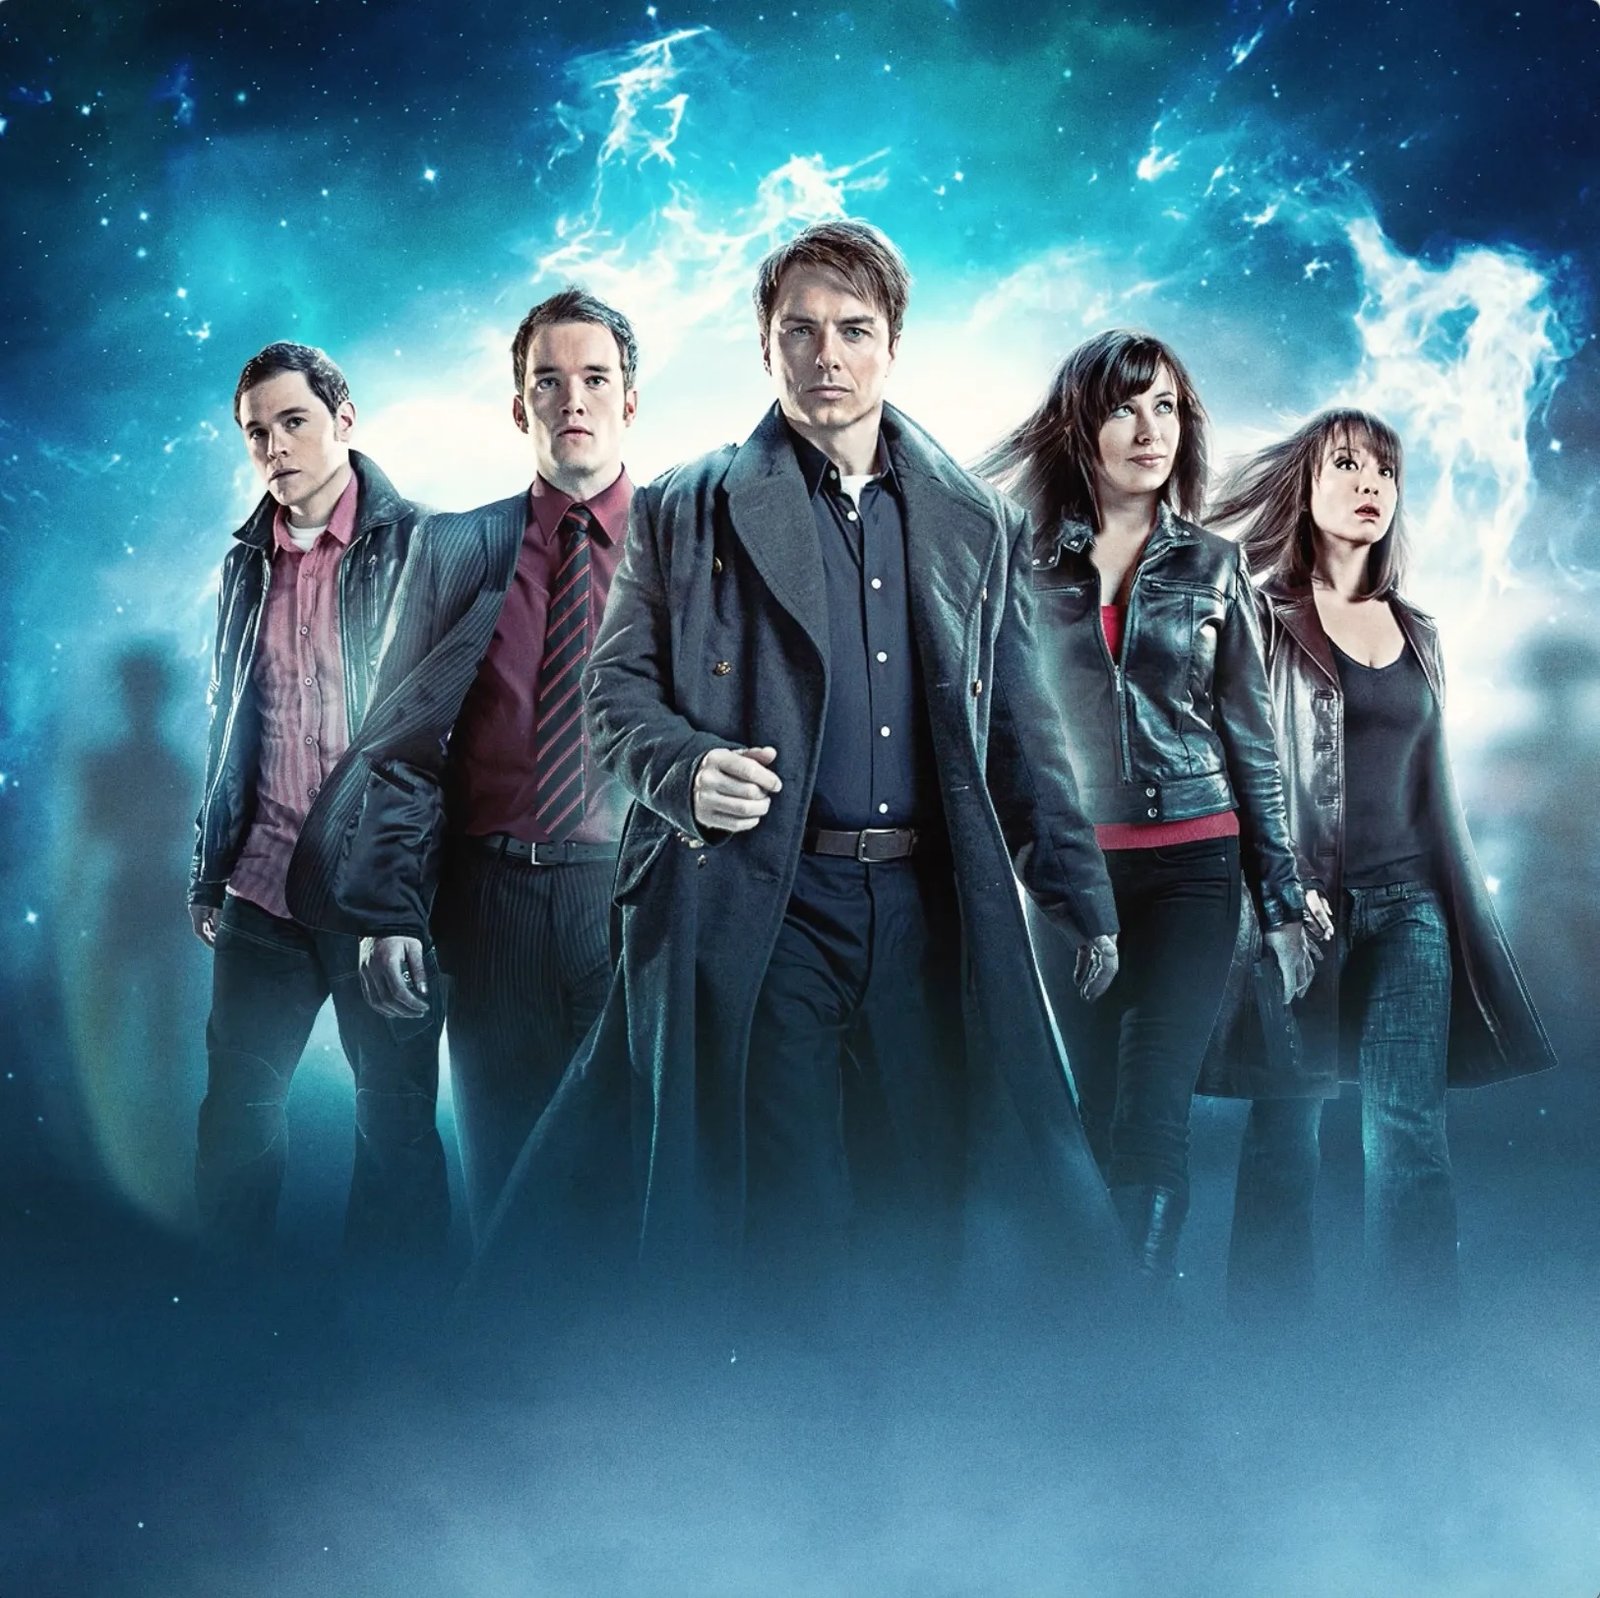 Phil Ford: “There’s Every Chance Doctor Who Spin-Off Torchwood Could Return”